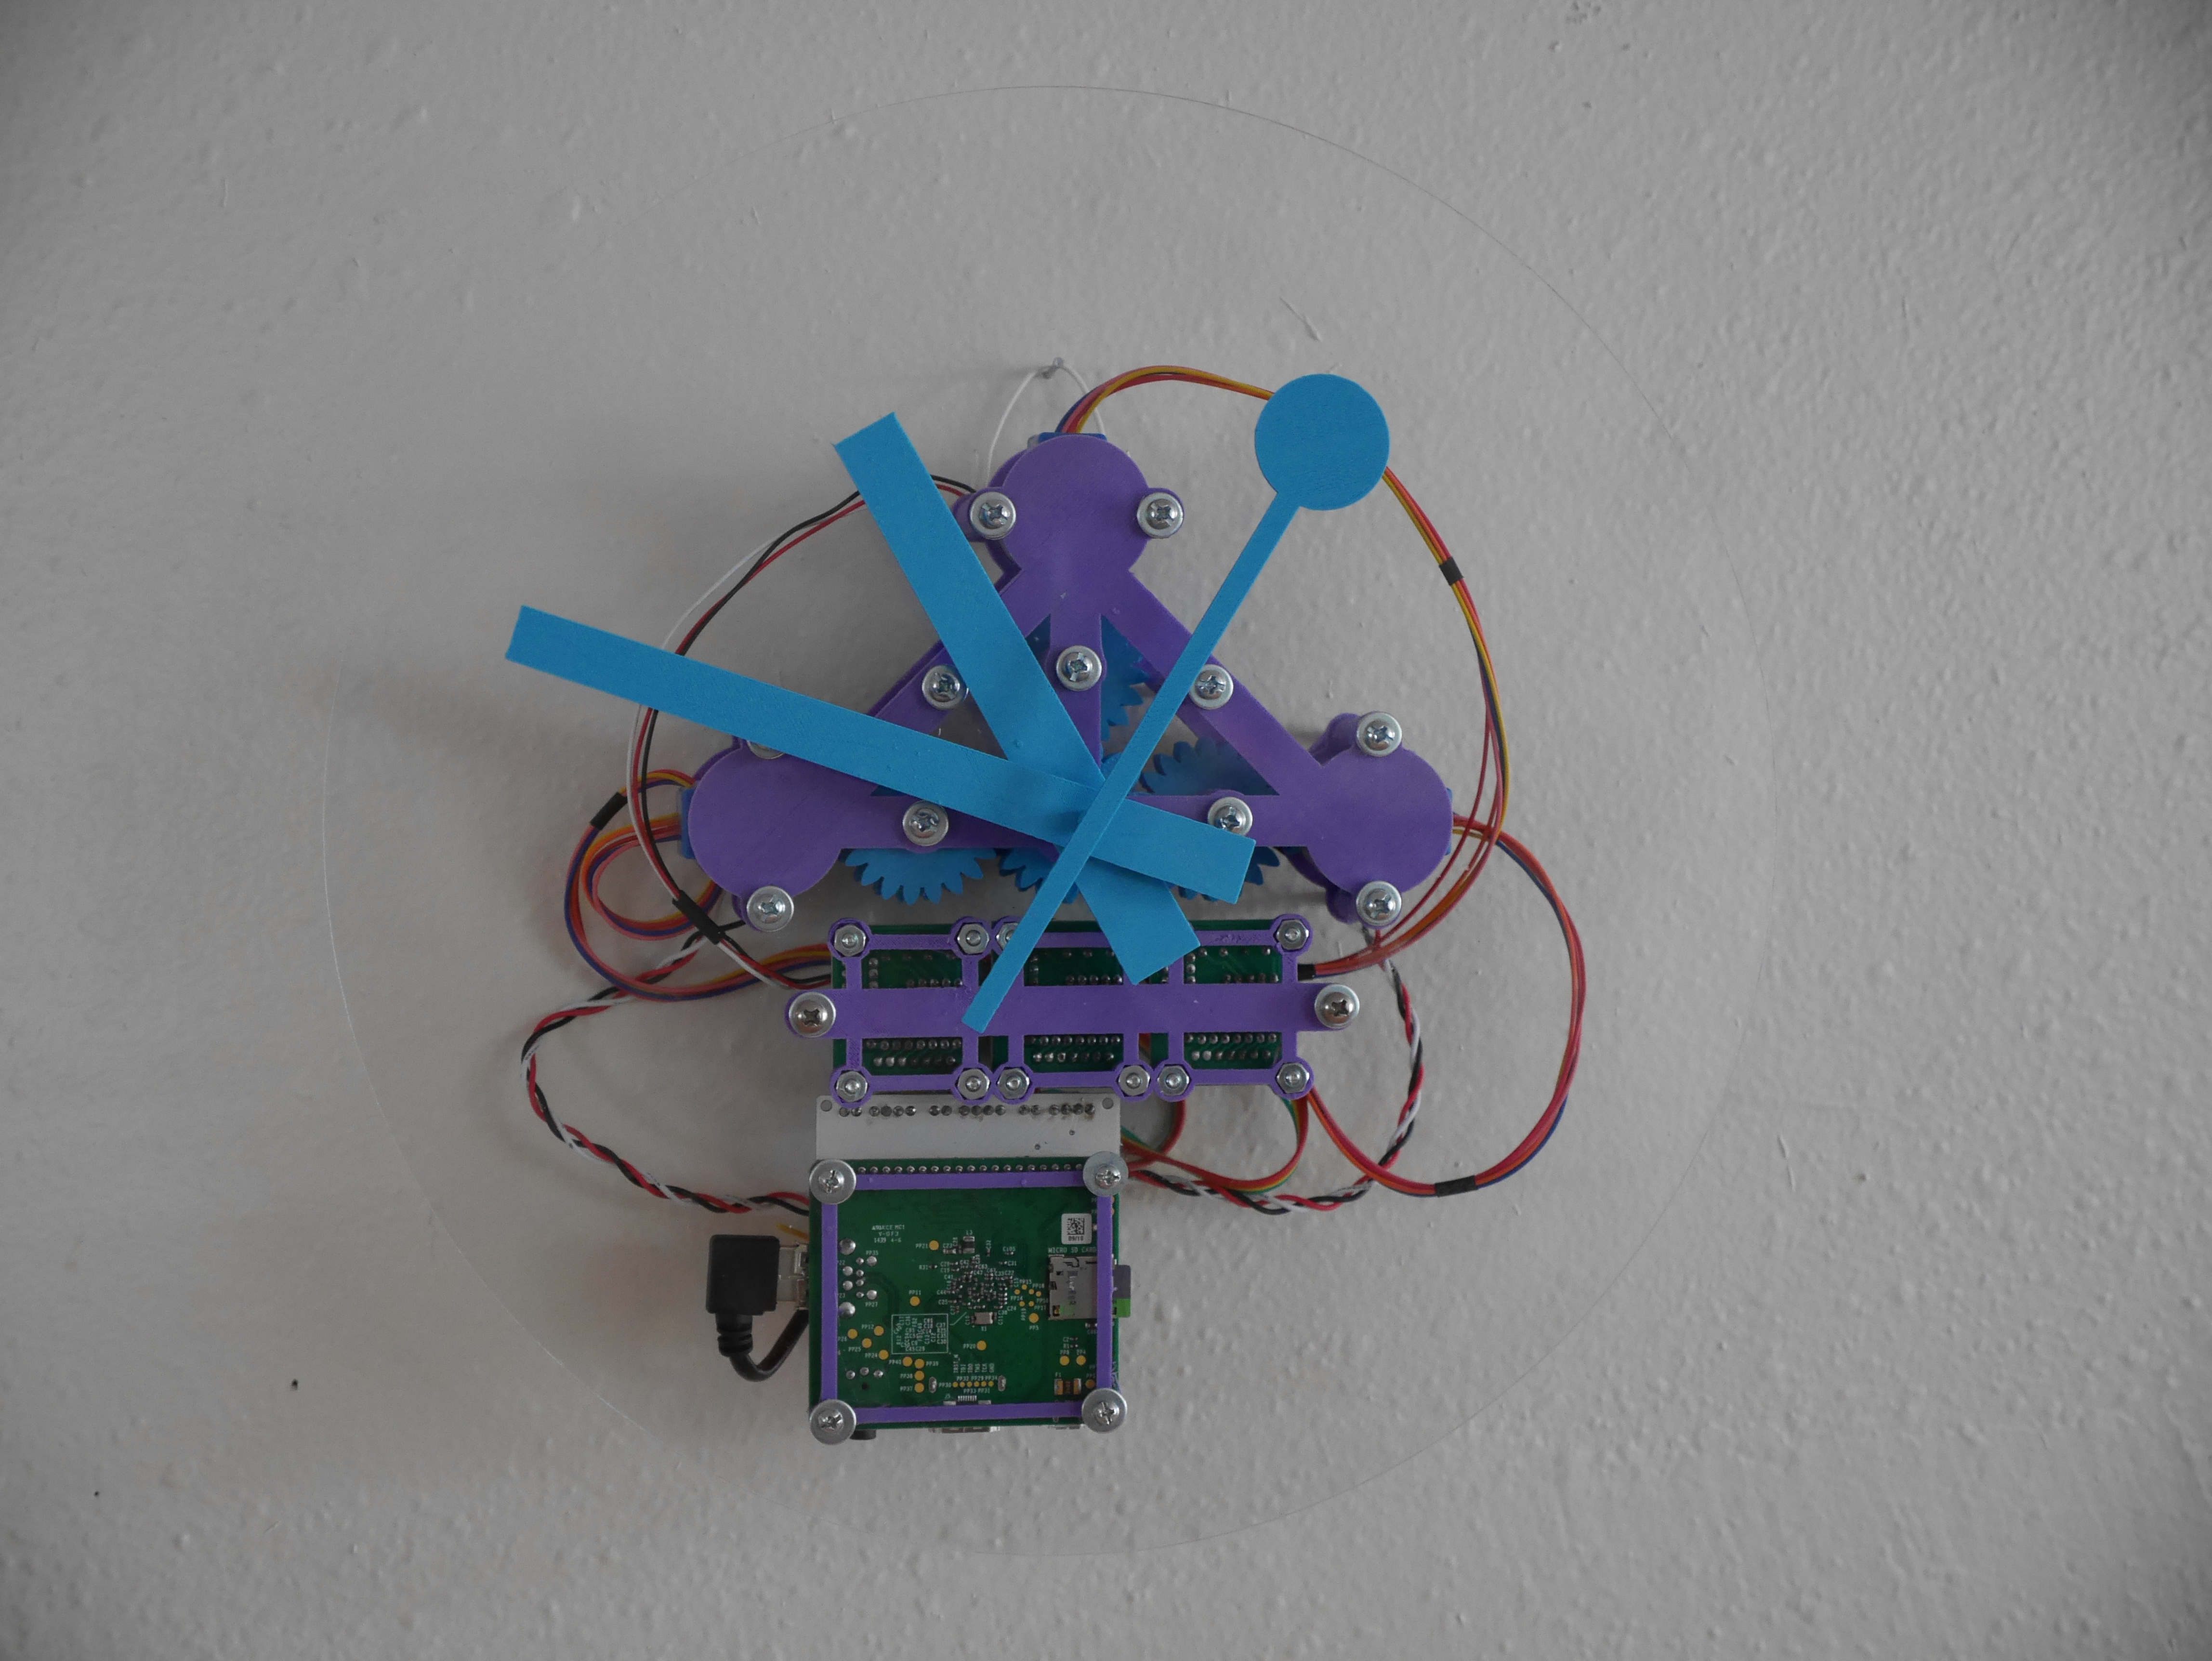 Final clock. Translucent body showing all components including gears and Raspberry Pi.